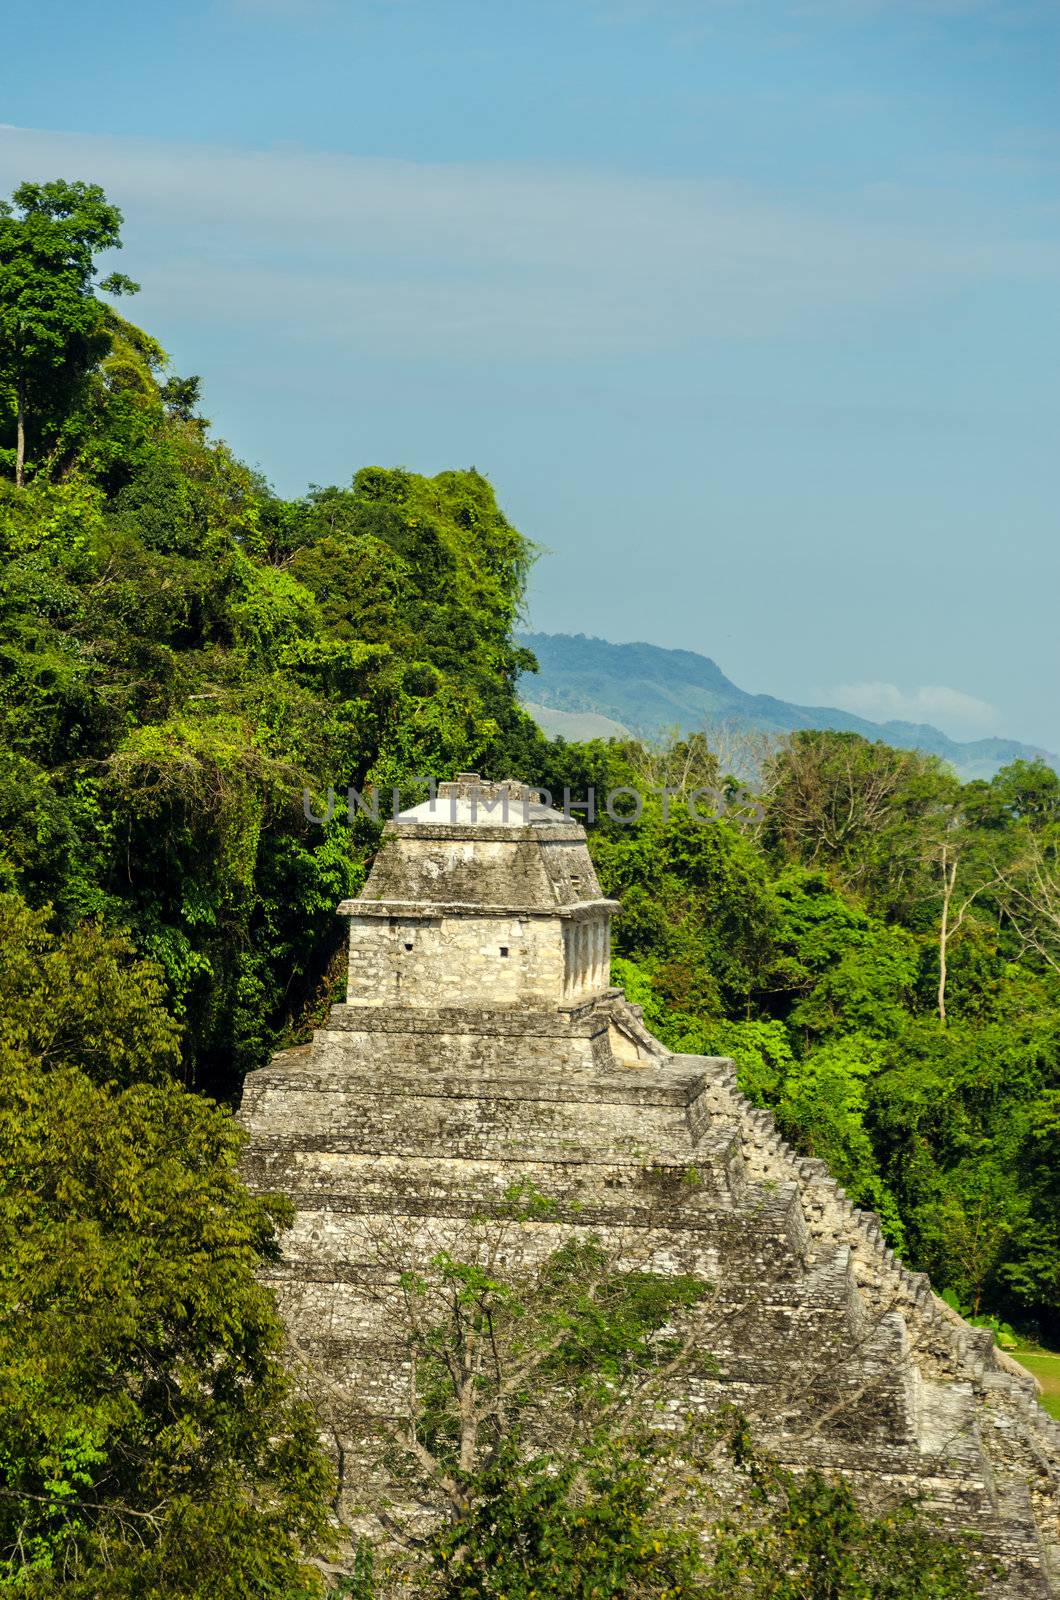 View of the Temple of the Inscriptions in Palenque, Mexico